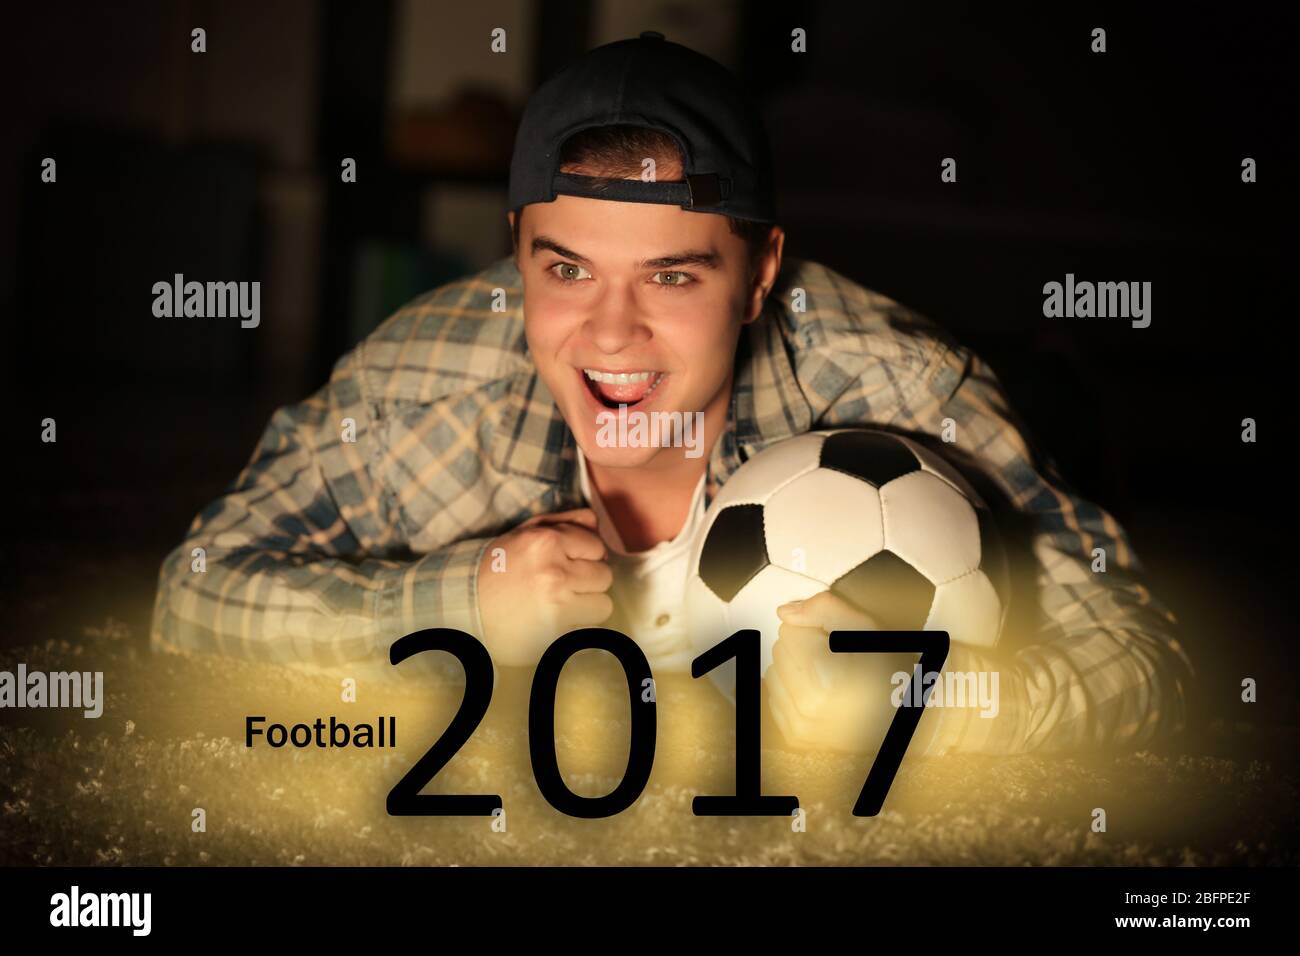 Text FOOTBALL 2017 and fan on background Stock Photo